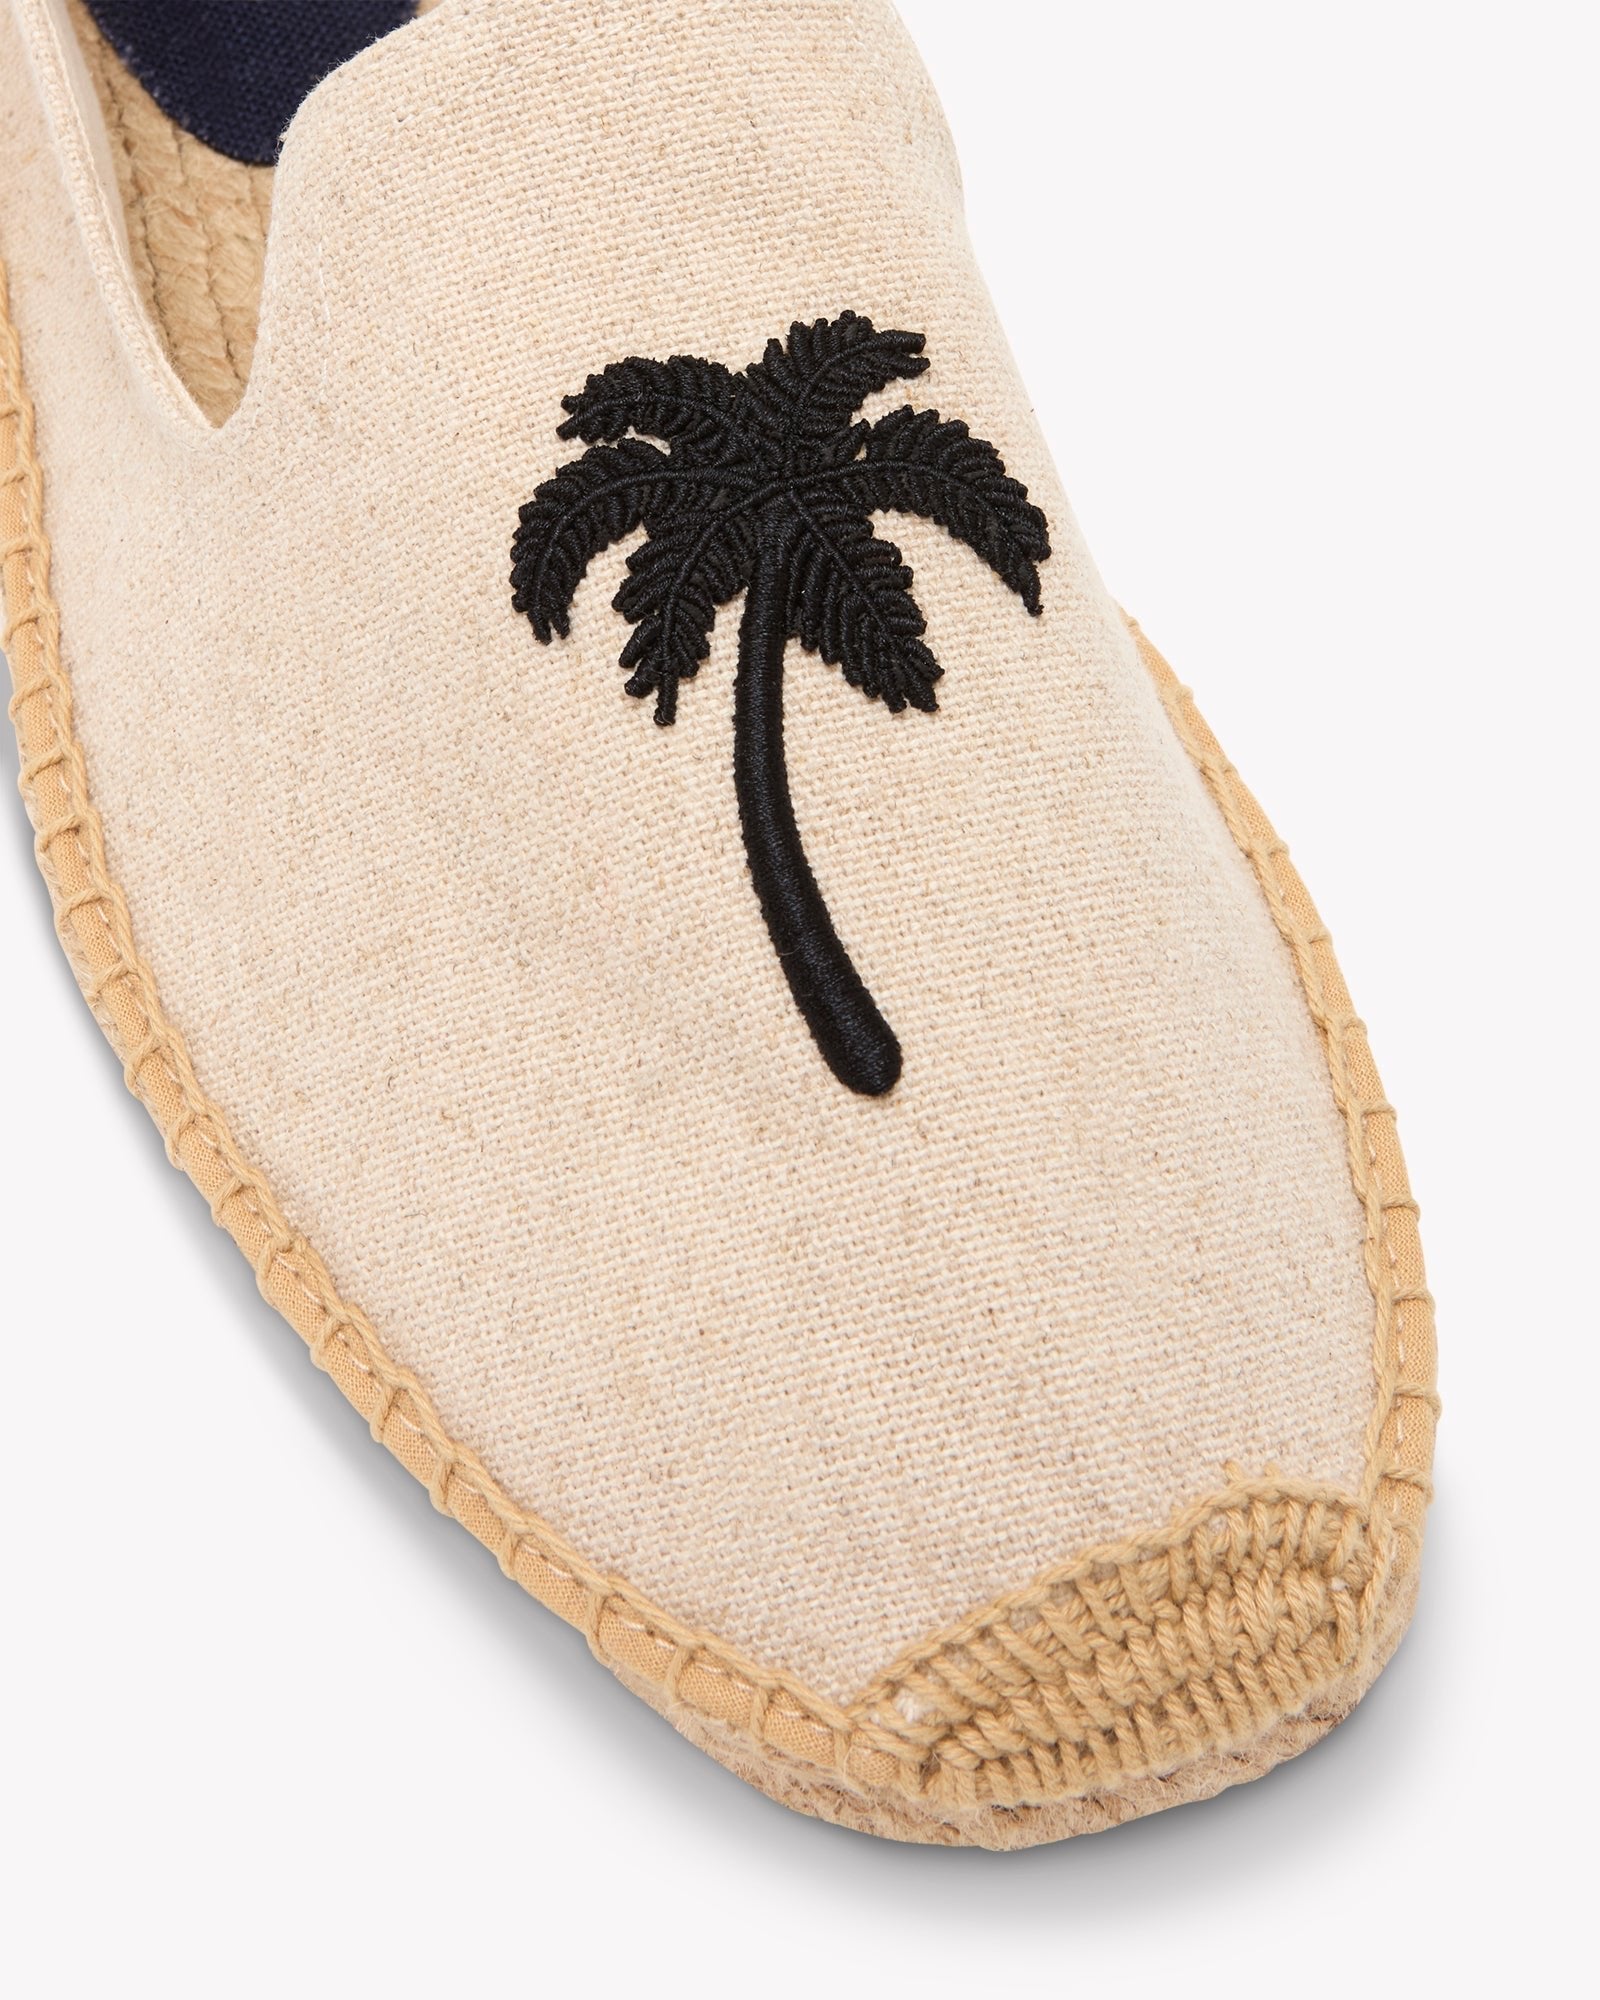 The Smoking Slipper - Embroidery / Palm Tree - Natural Undyed - Men's - Men's Espadrilles - Natural Undyed / Palm Tree - Soludos -